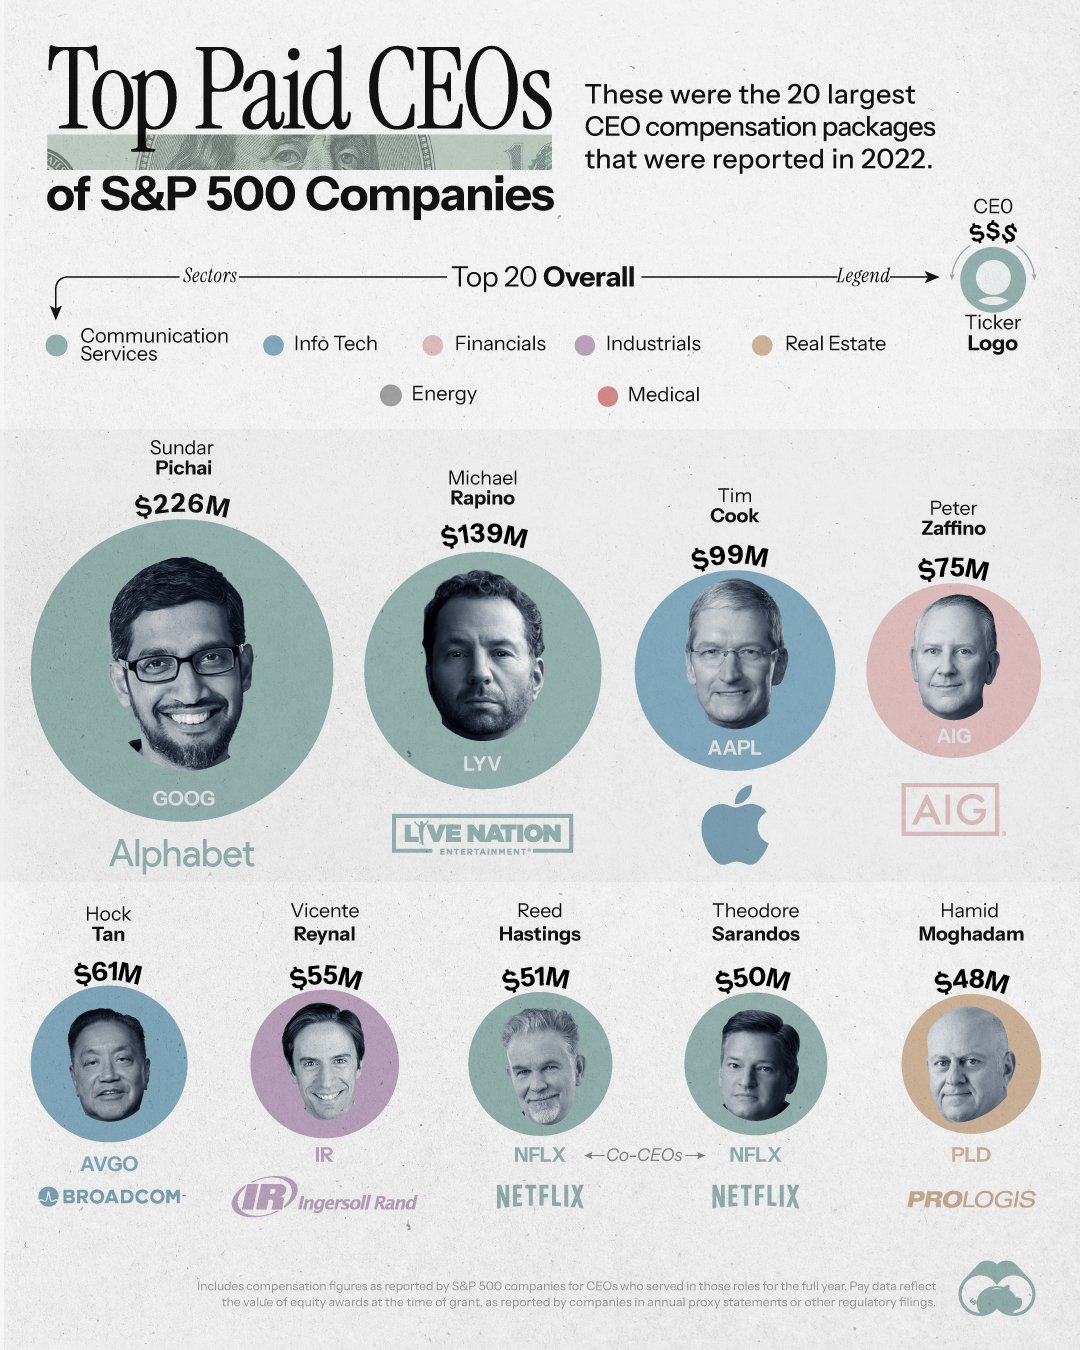 IG Highest Paid CEOs of S&P 500